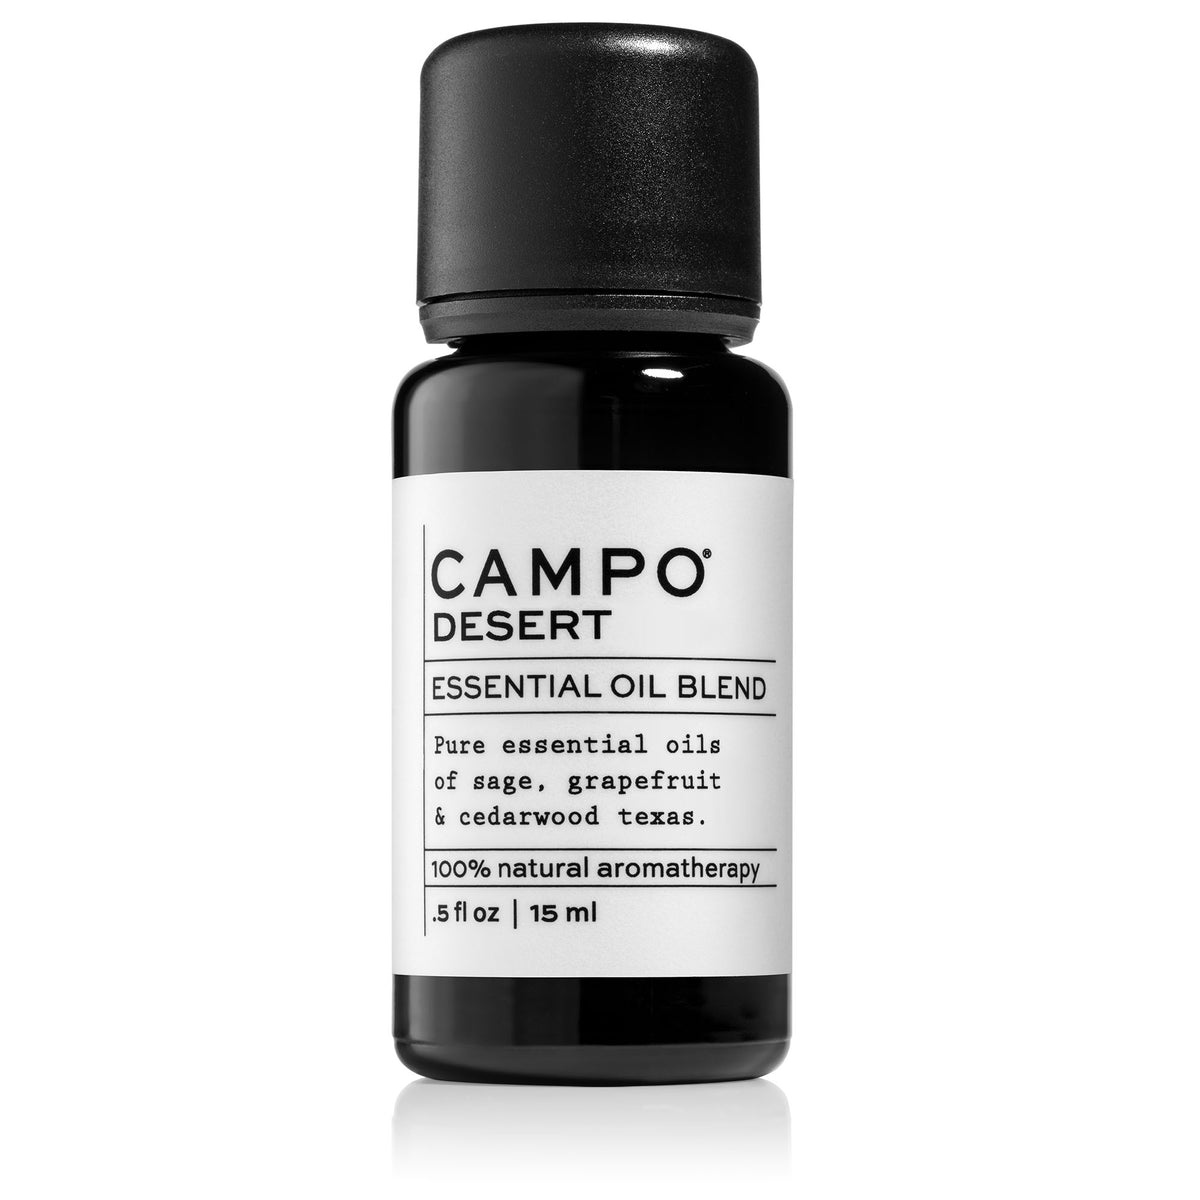 Campo Beauty DESERT Blend 15 ml Essential Oil. Escape to the desert with this 100% pure essential oil blend of grapefruit, sage, cedarwood texas, and cedarwood himalayan.